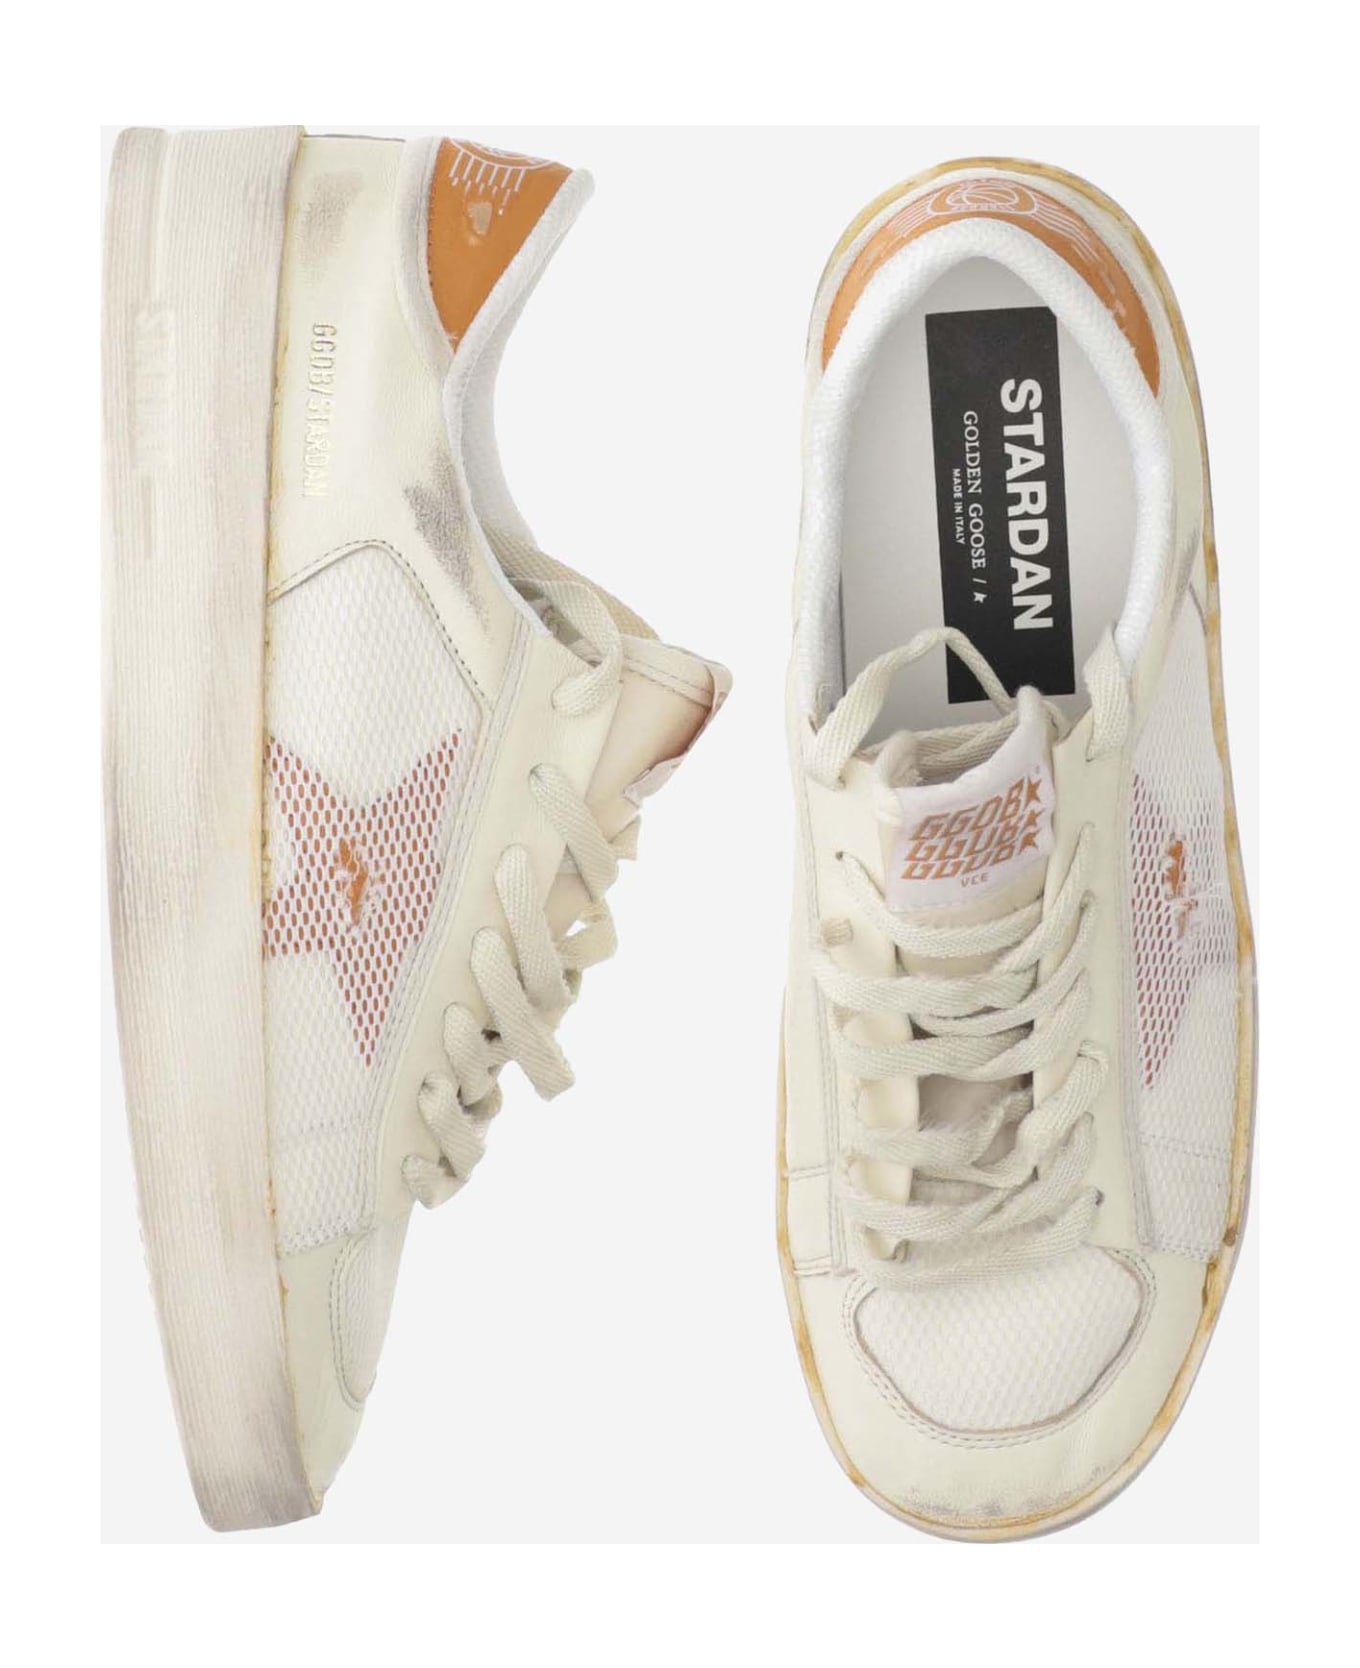 Golden Goose Stardan Sneakers With Distressed Effect - WHITE-ORANGE スニーカー